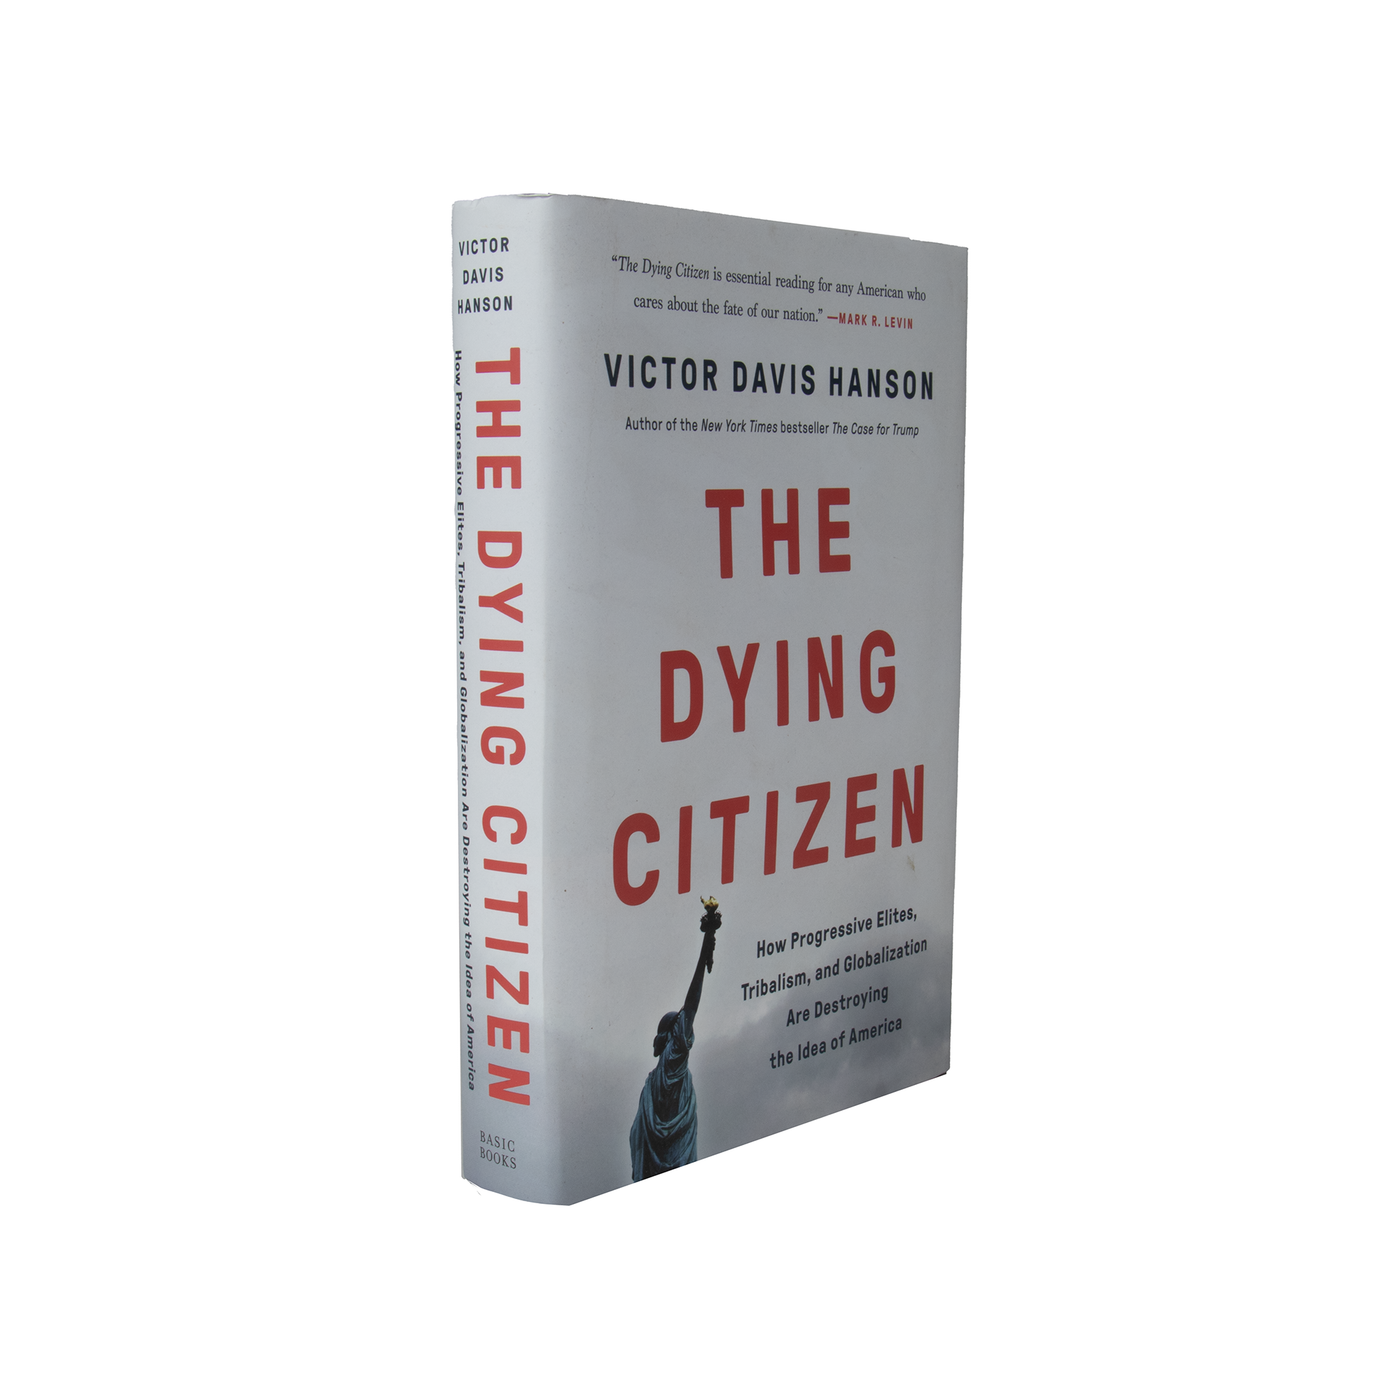 The Dying Citizen: How Progressive Elites, Tribalism, and Globalization Are Destroying the Idea of America by Victor Davis Hanson